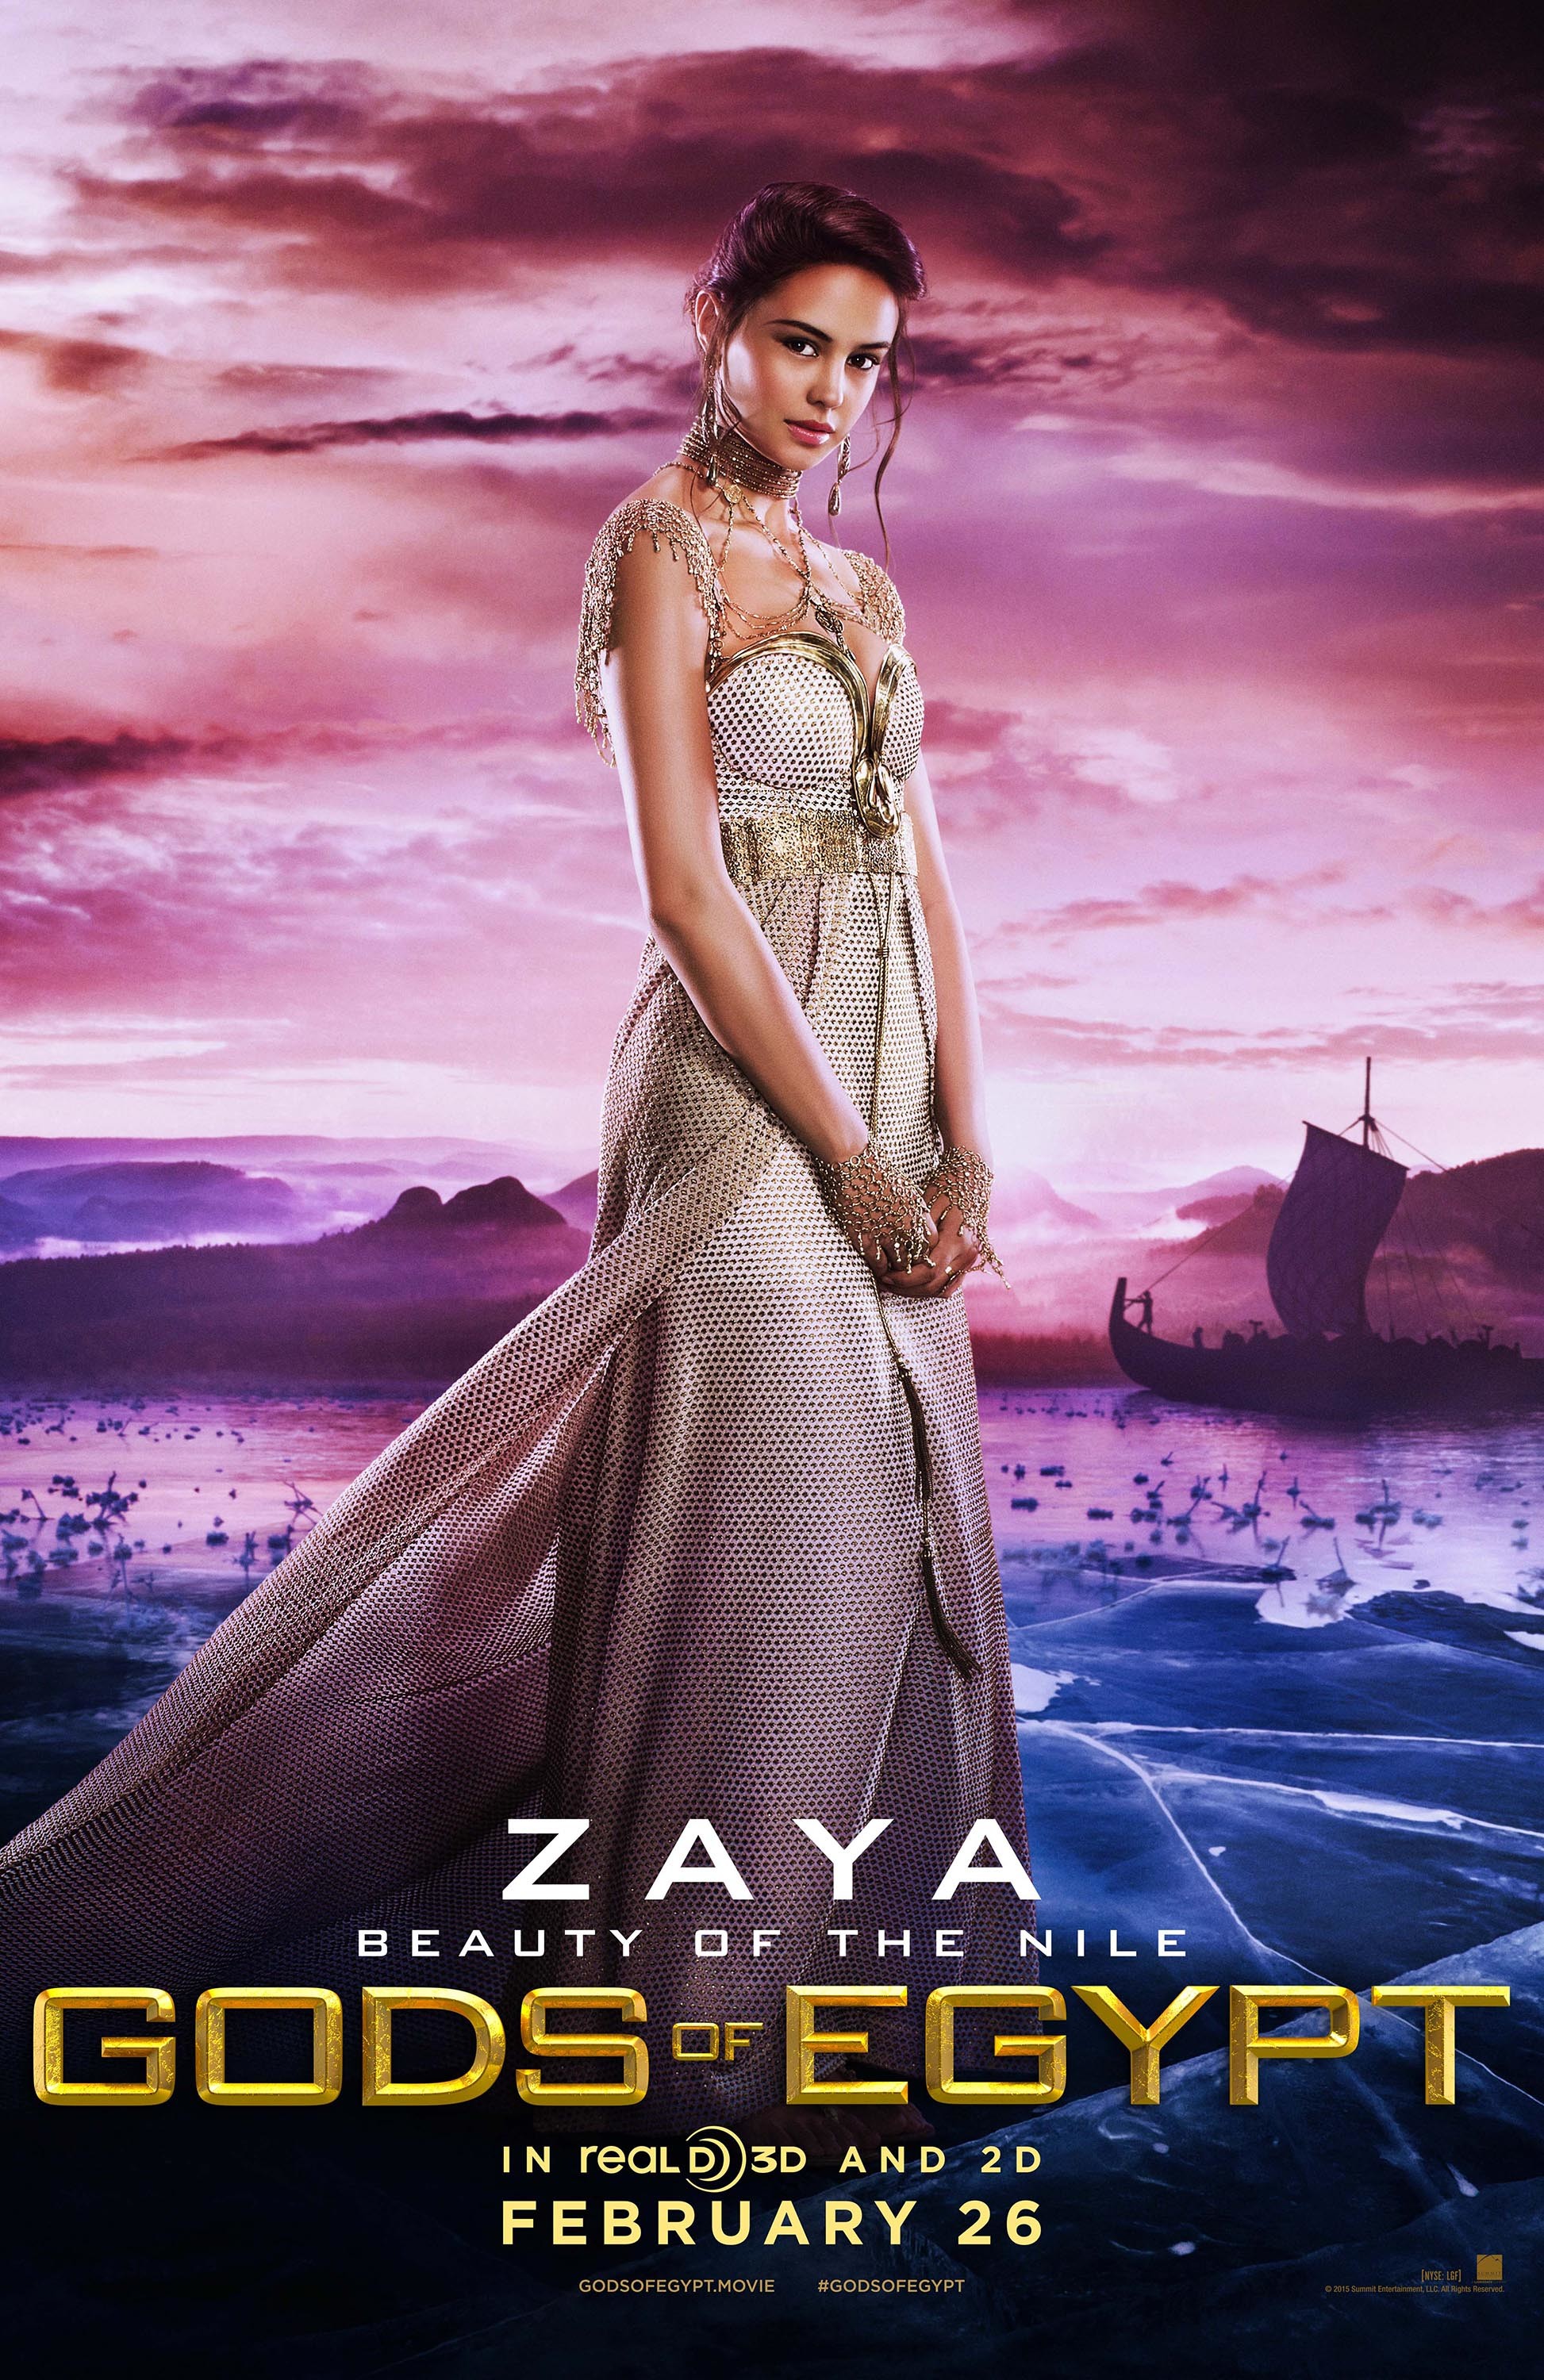 1946x3000 Gods of Egypt images Zaya Poster HD wallpaper and background photos